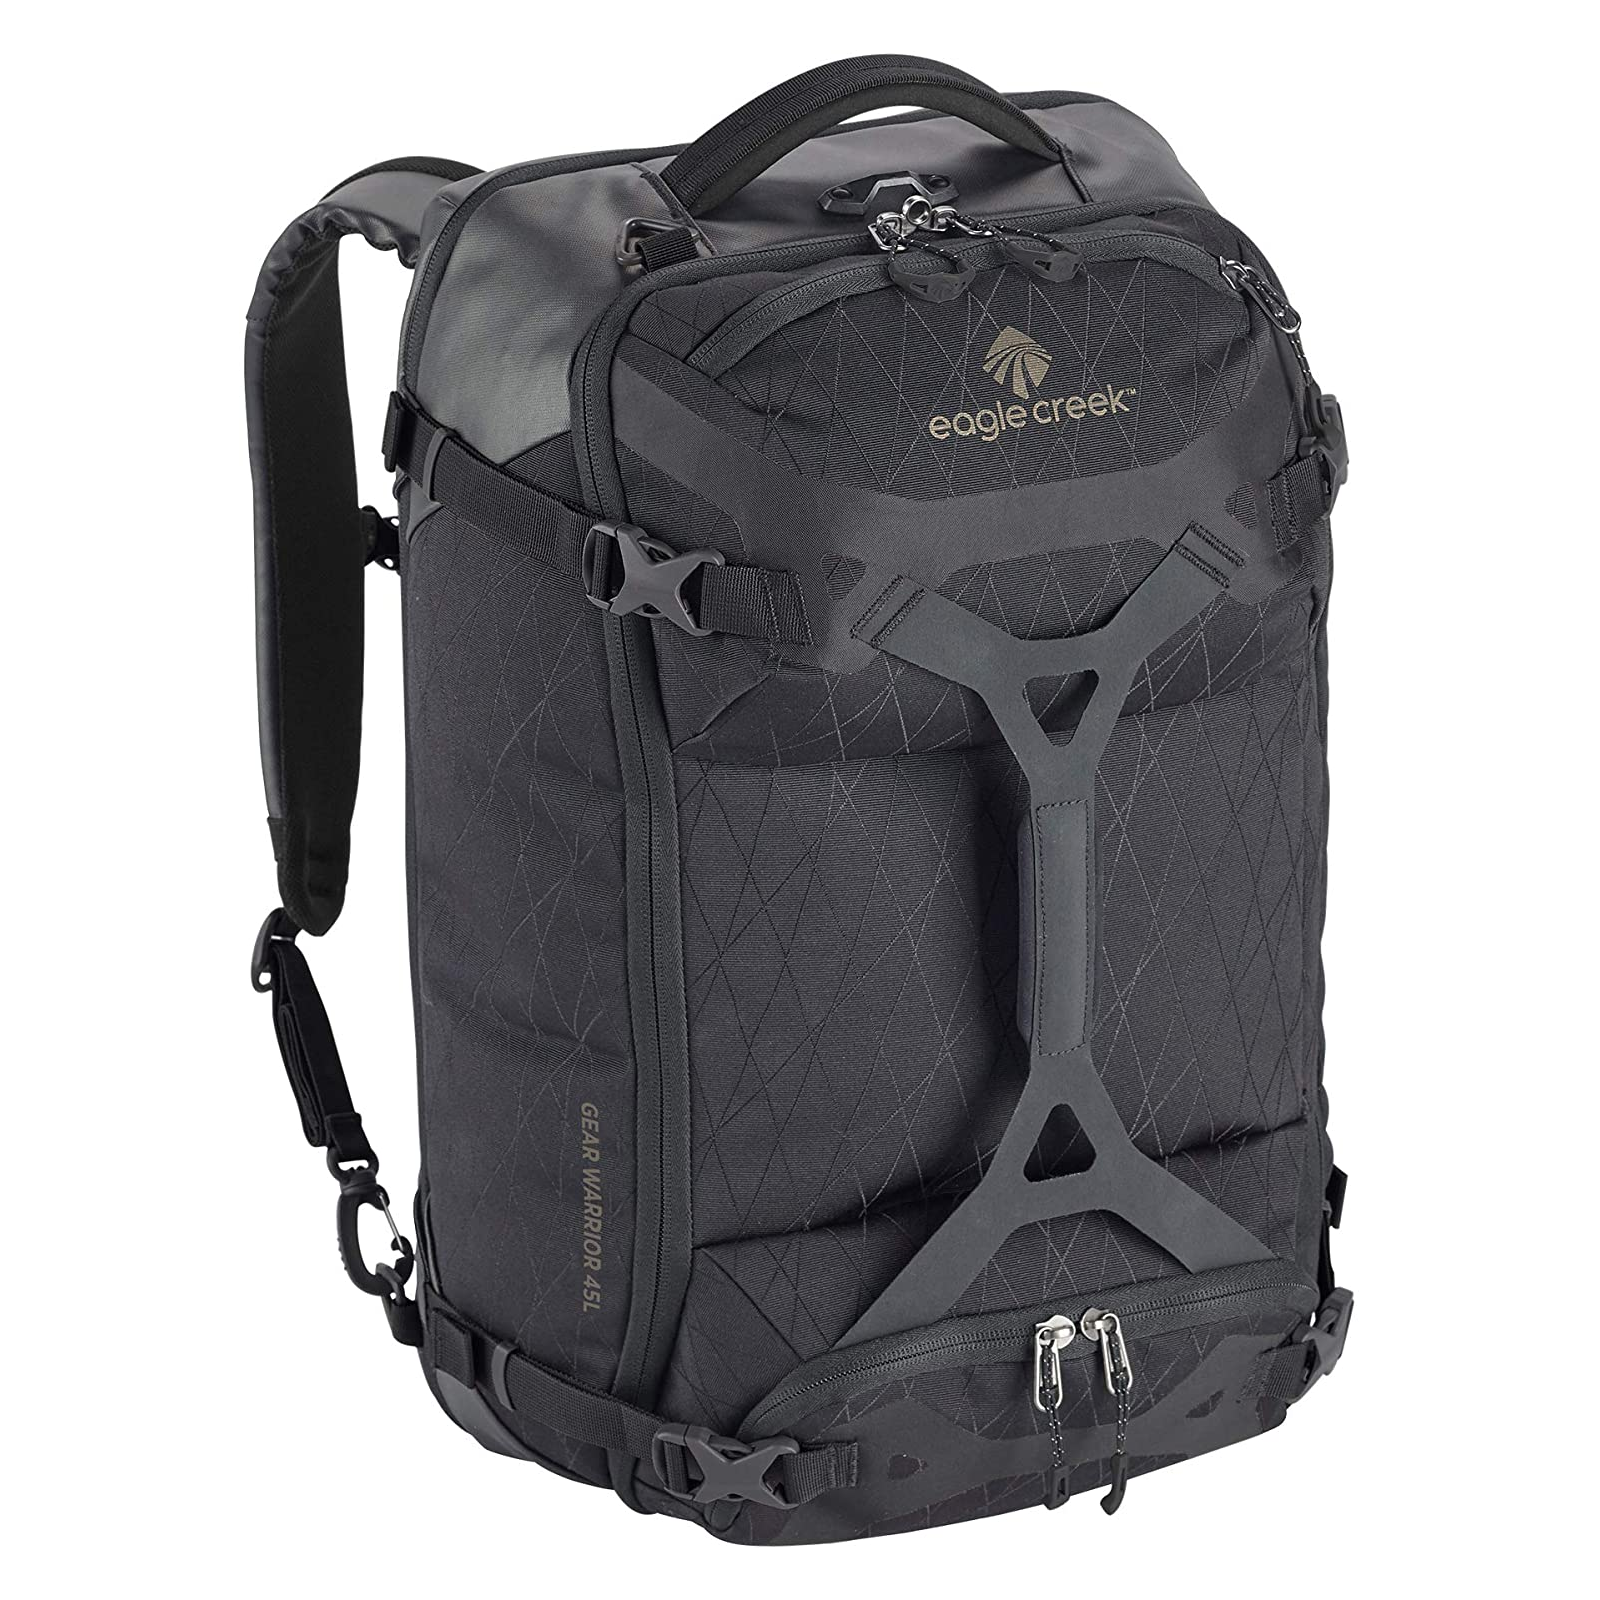 Eagle Creek Gear Warrior Travel Pack 45L Side View